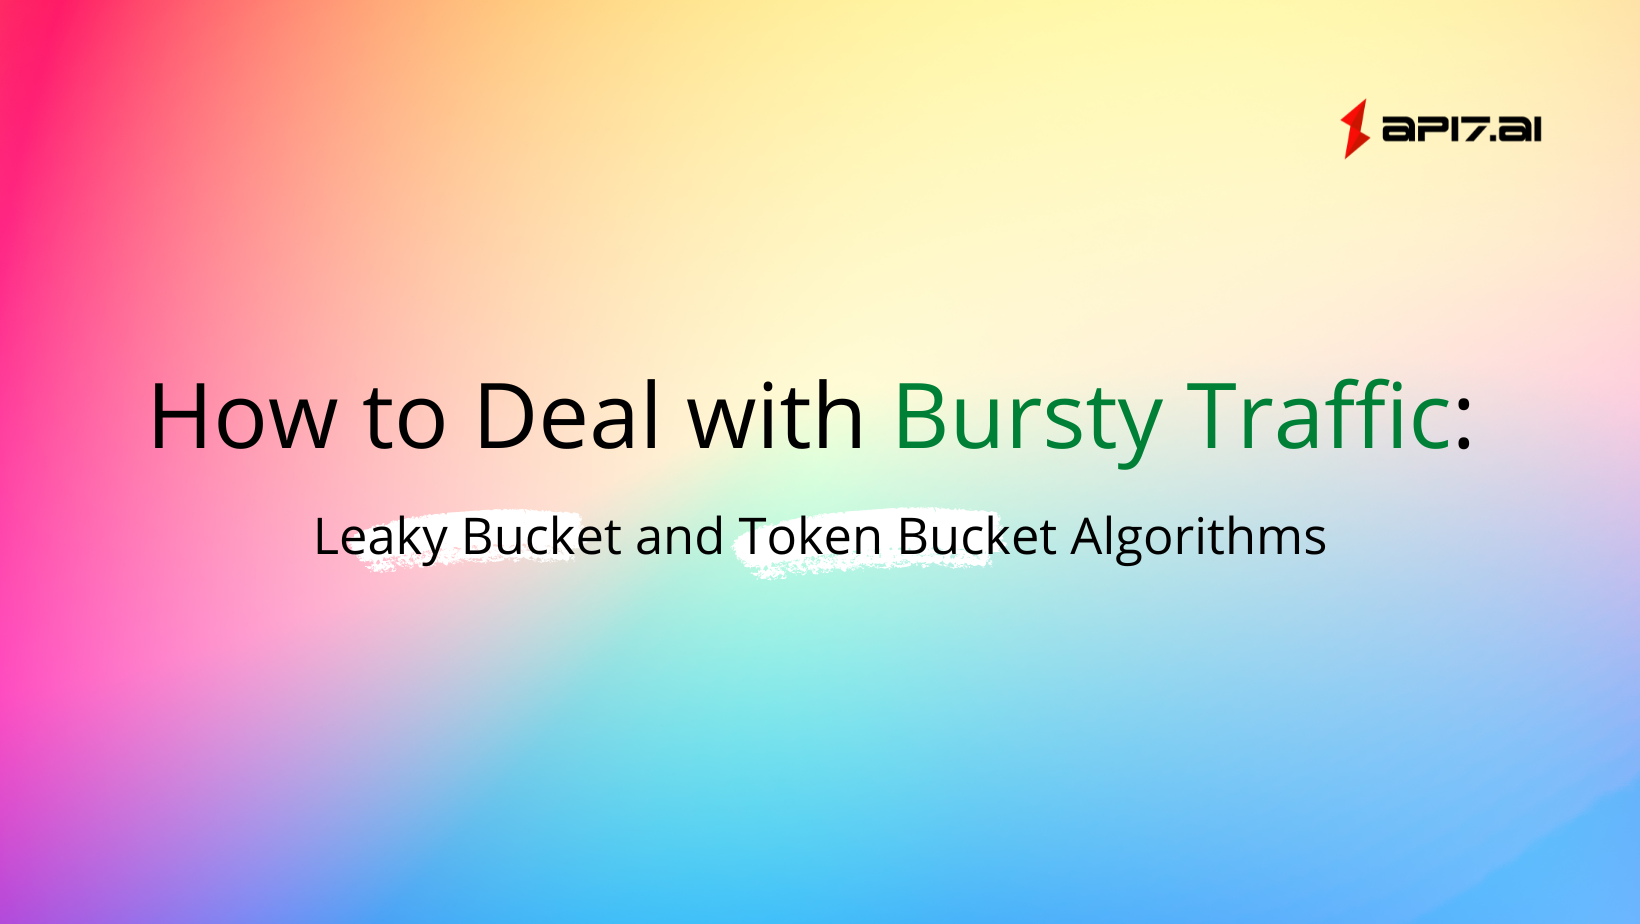 How to Deal with Bursty Traffic: Leaky Bucket and Token Bucket Algorithms